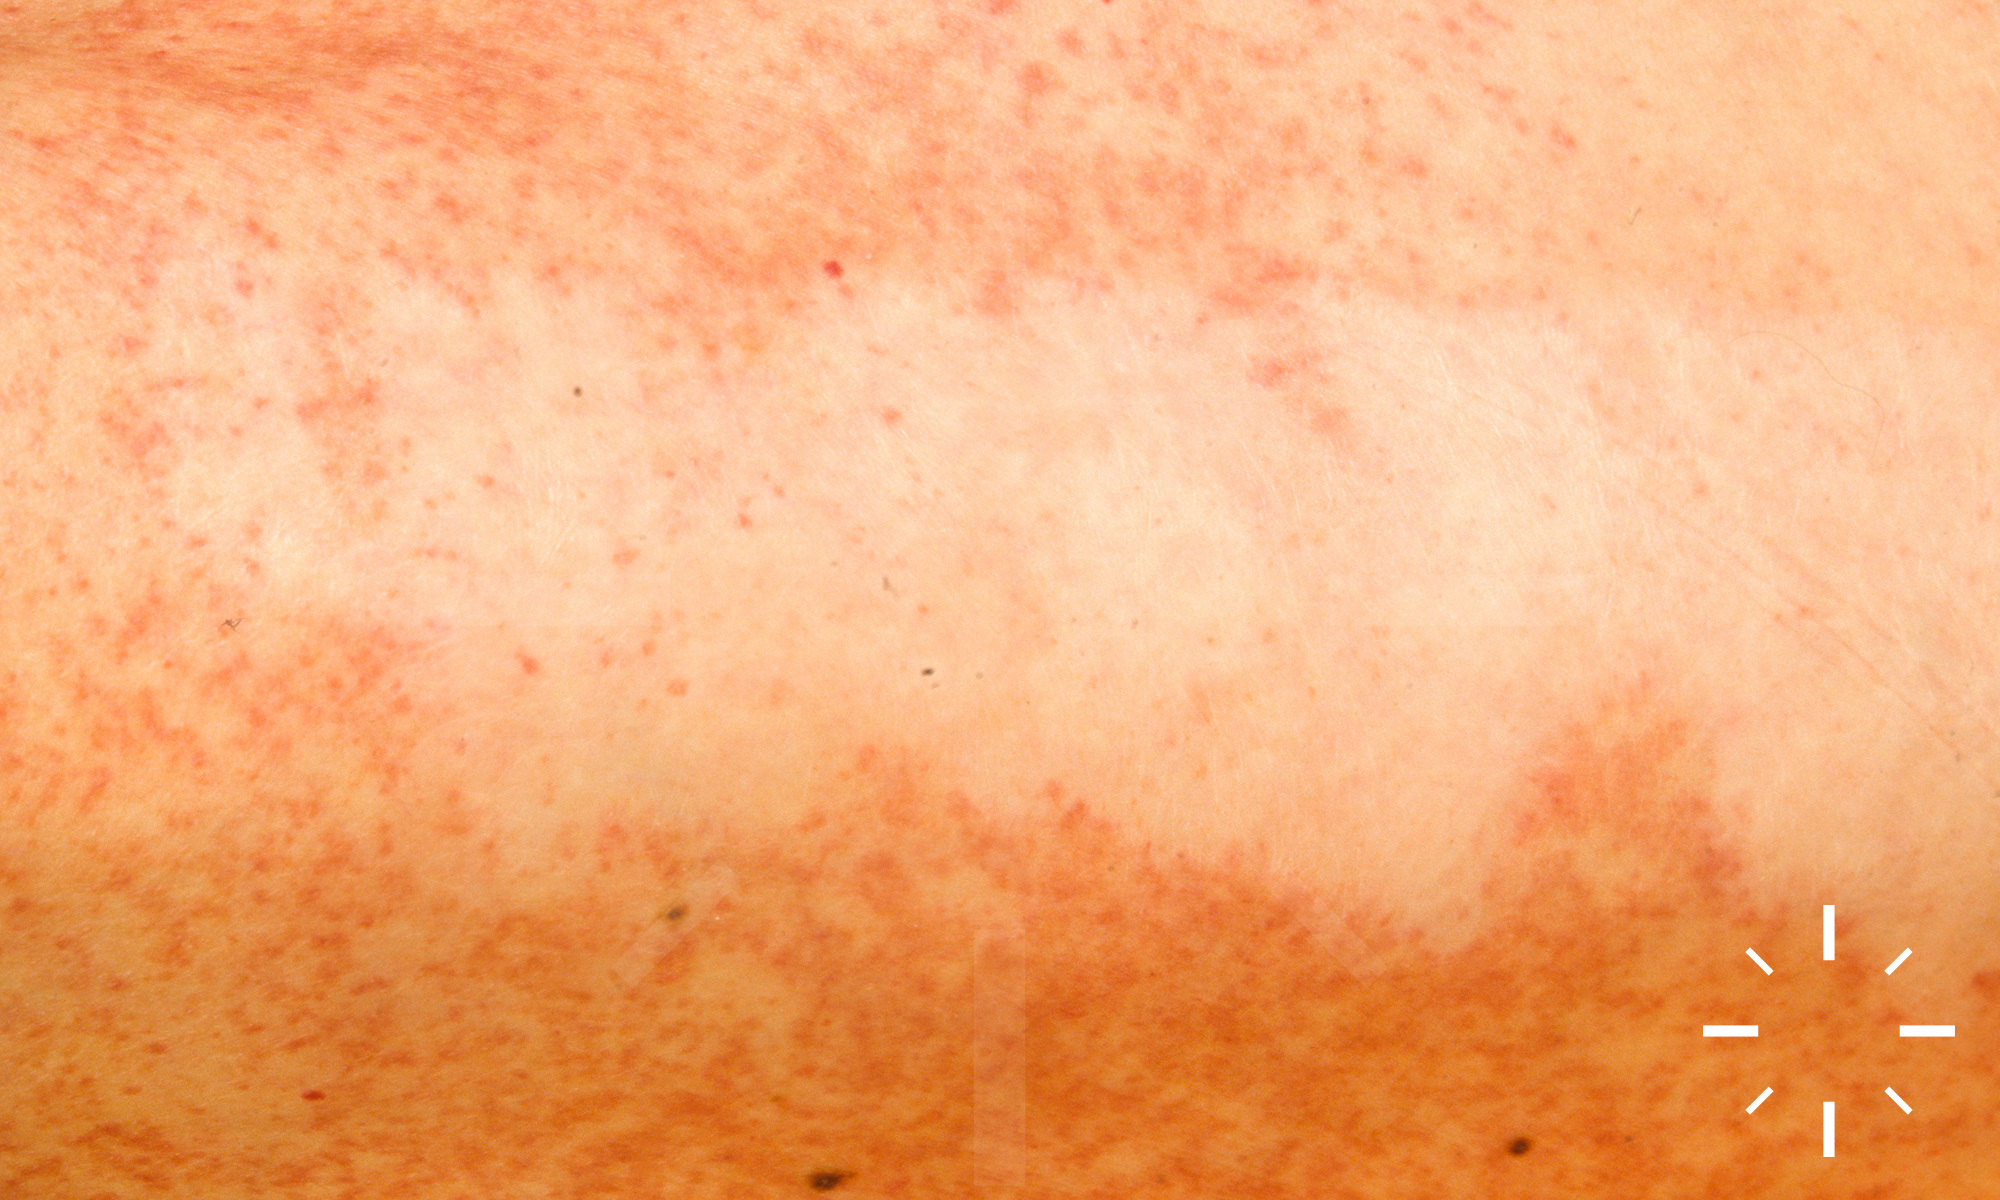 Dermacompass Stevens Johnson Syndrome And Toxic Epidermal Necrolysis